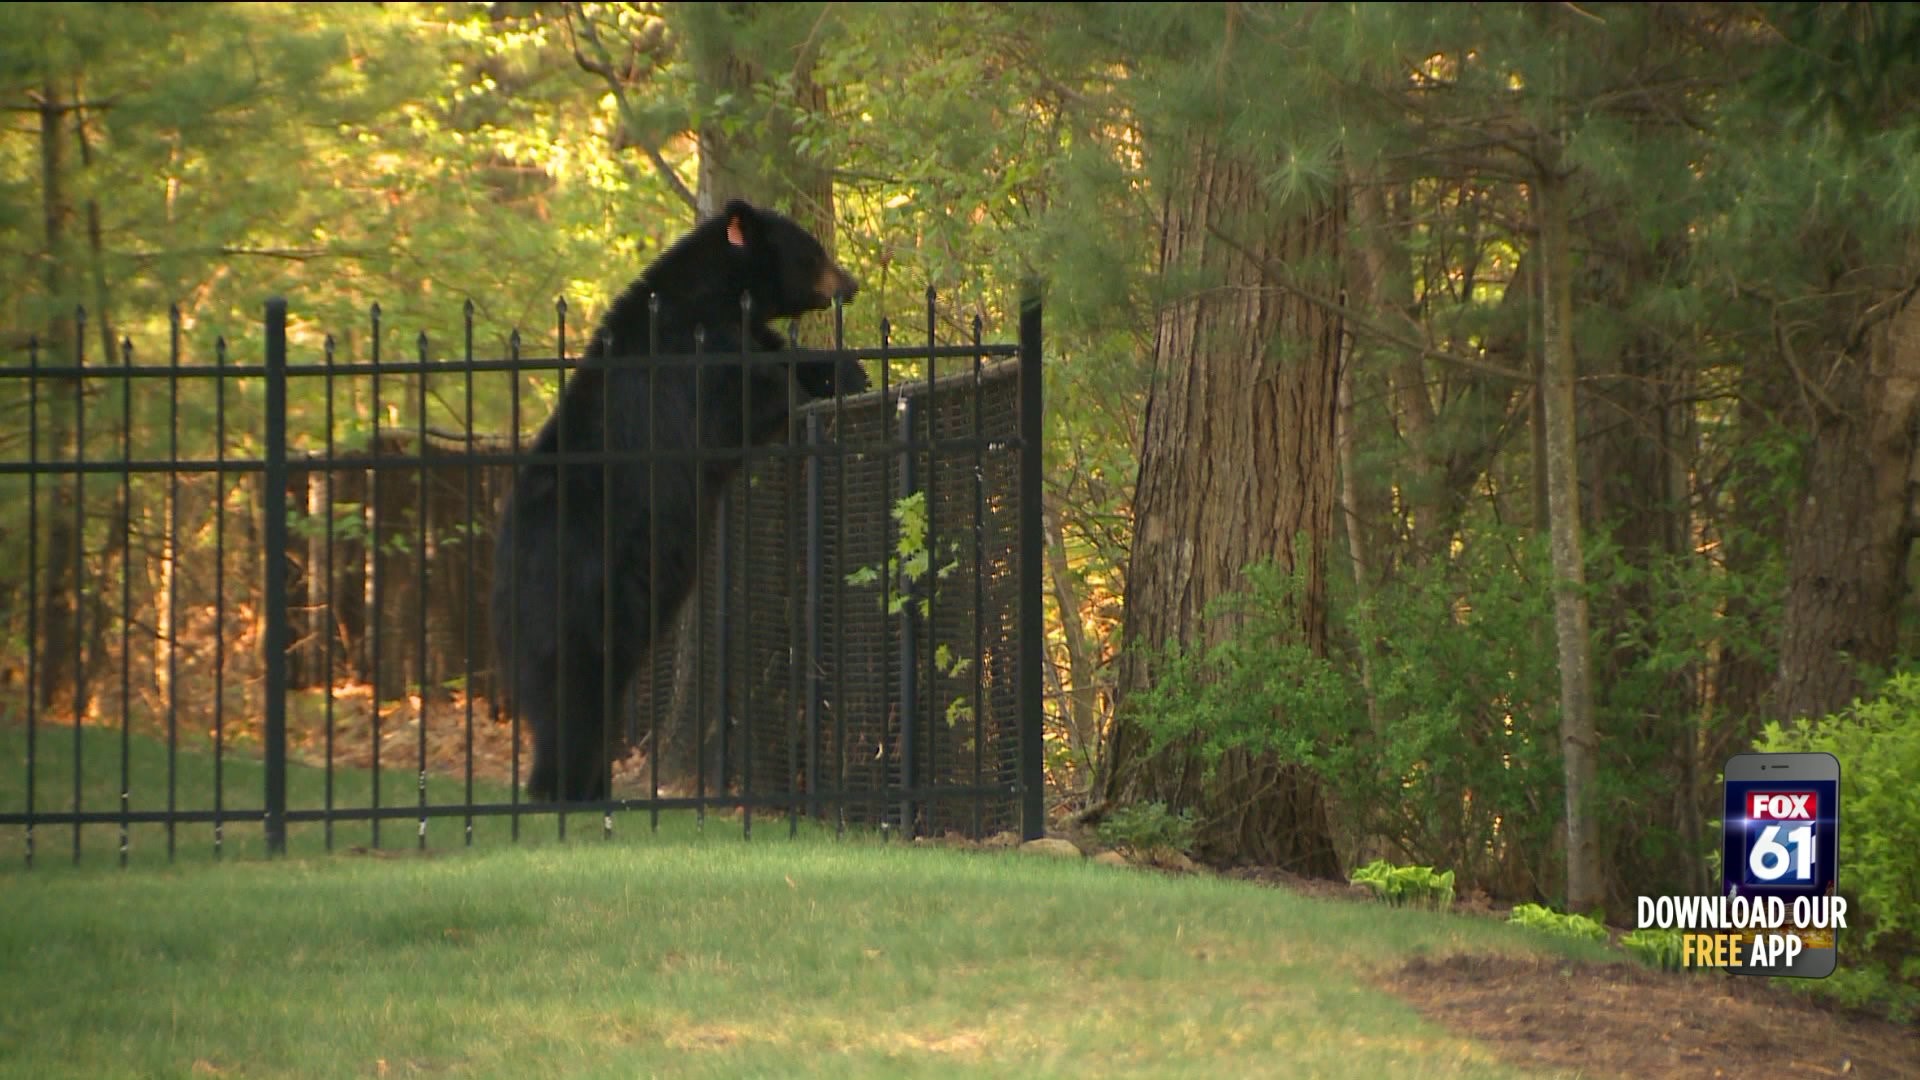 Connecticut residents advised to expect more bear sightings